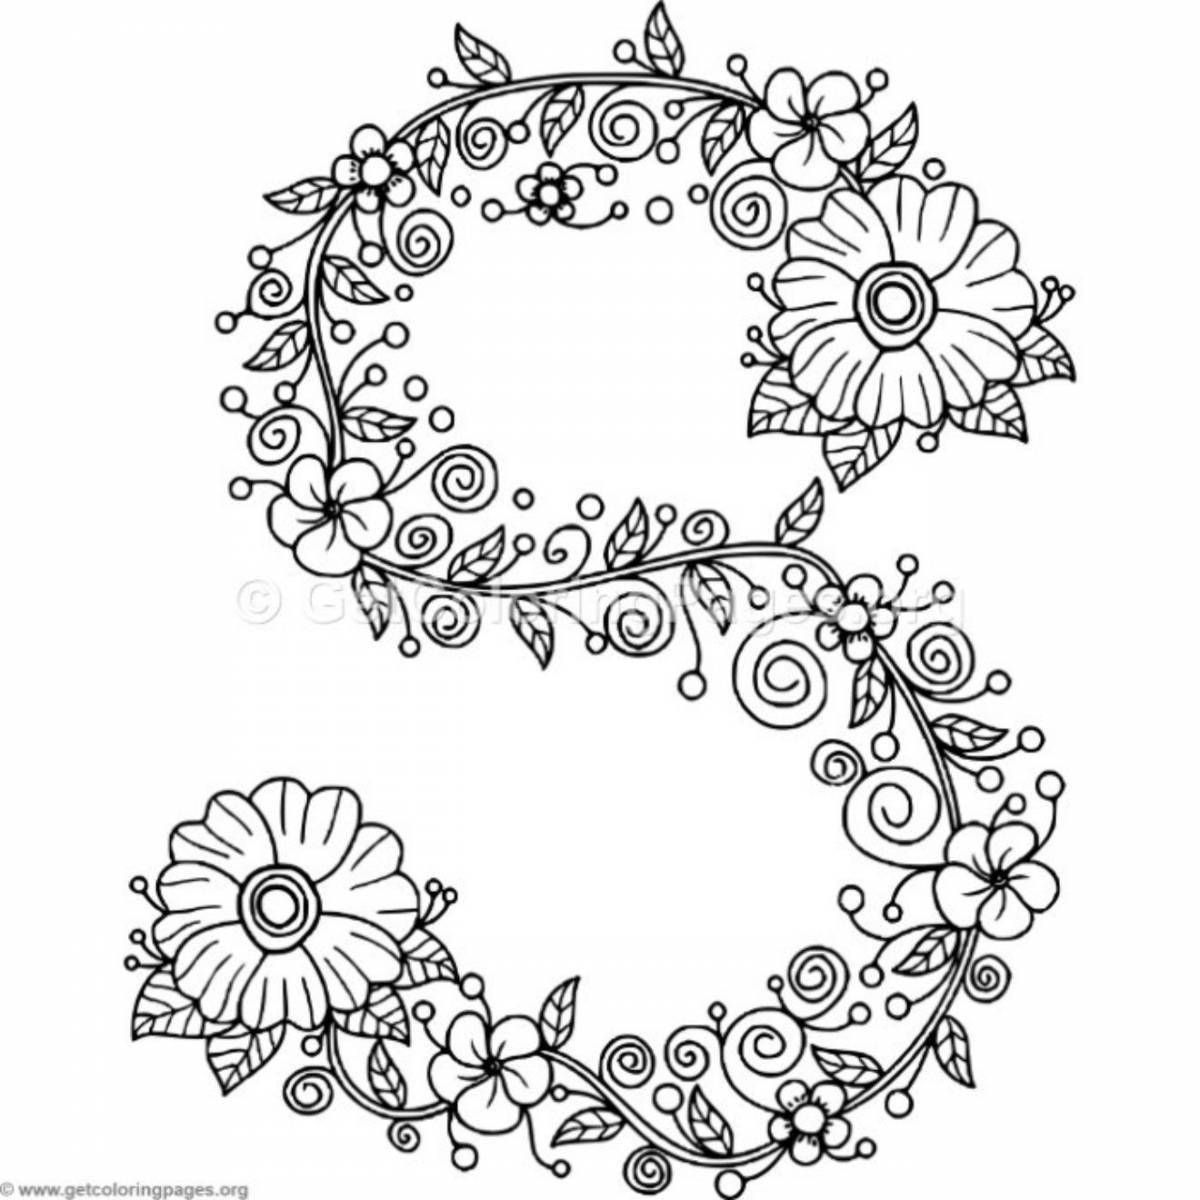 Charming letter c with flowers